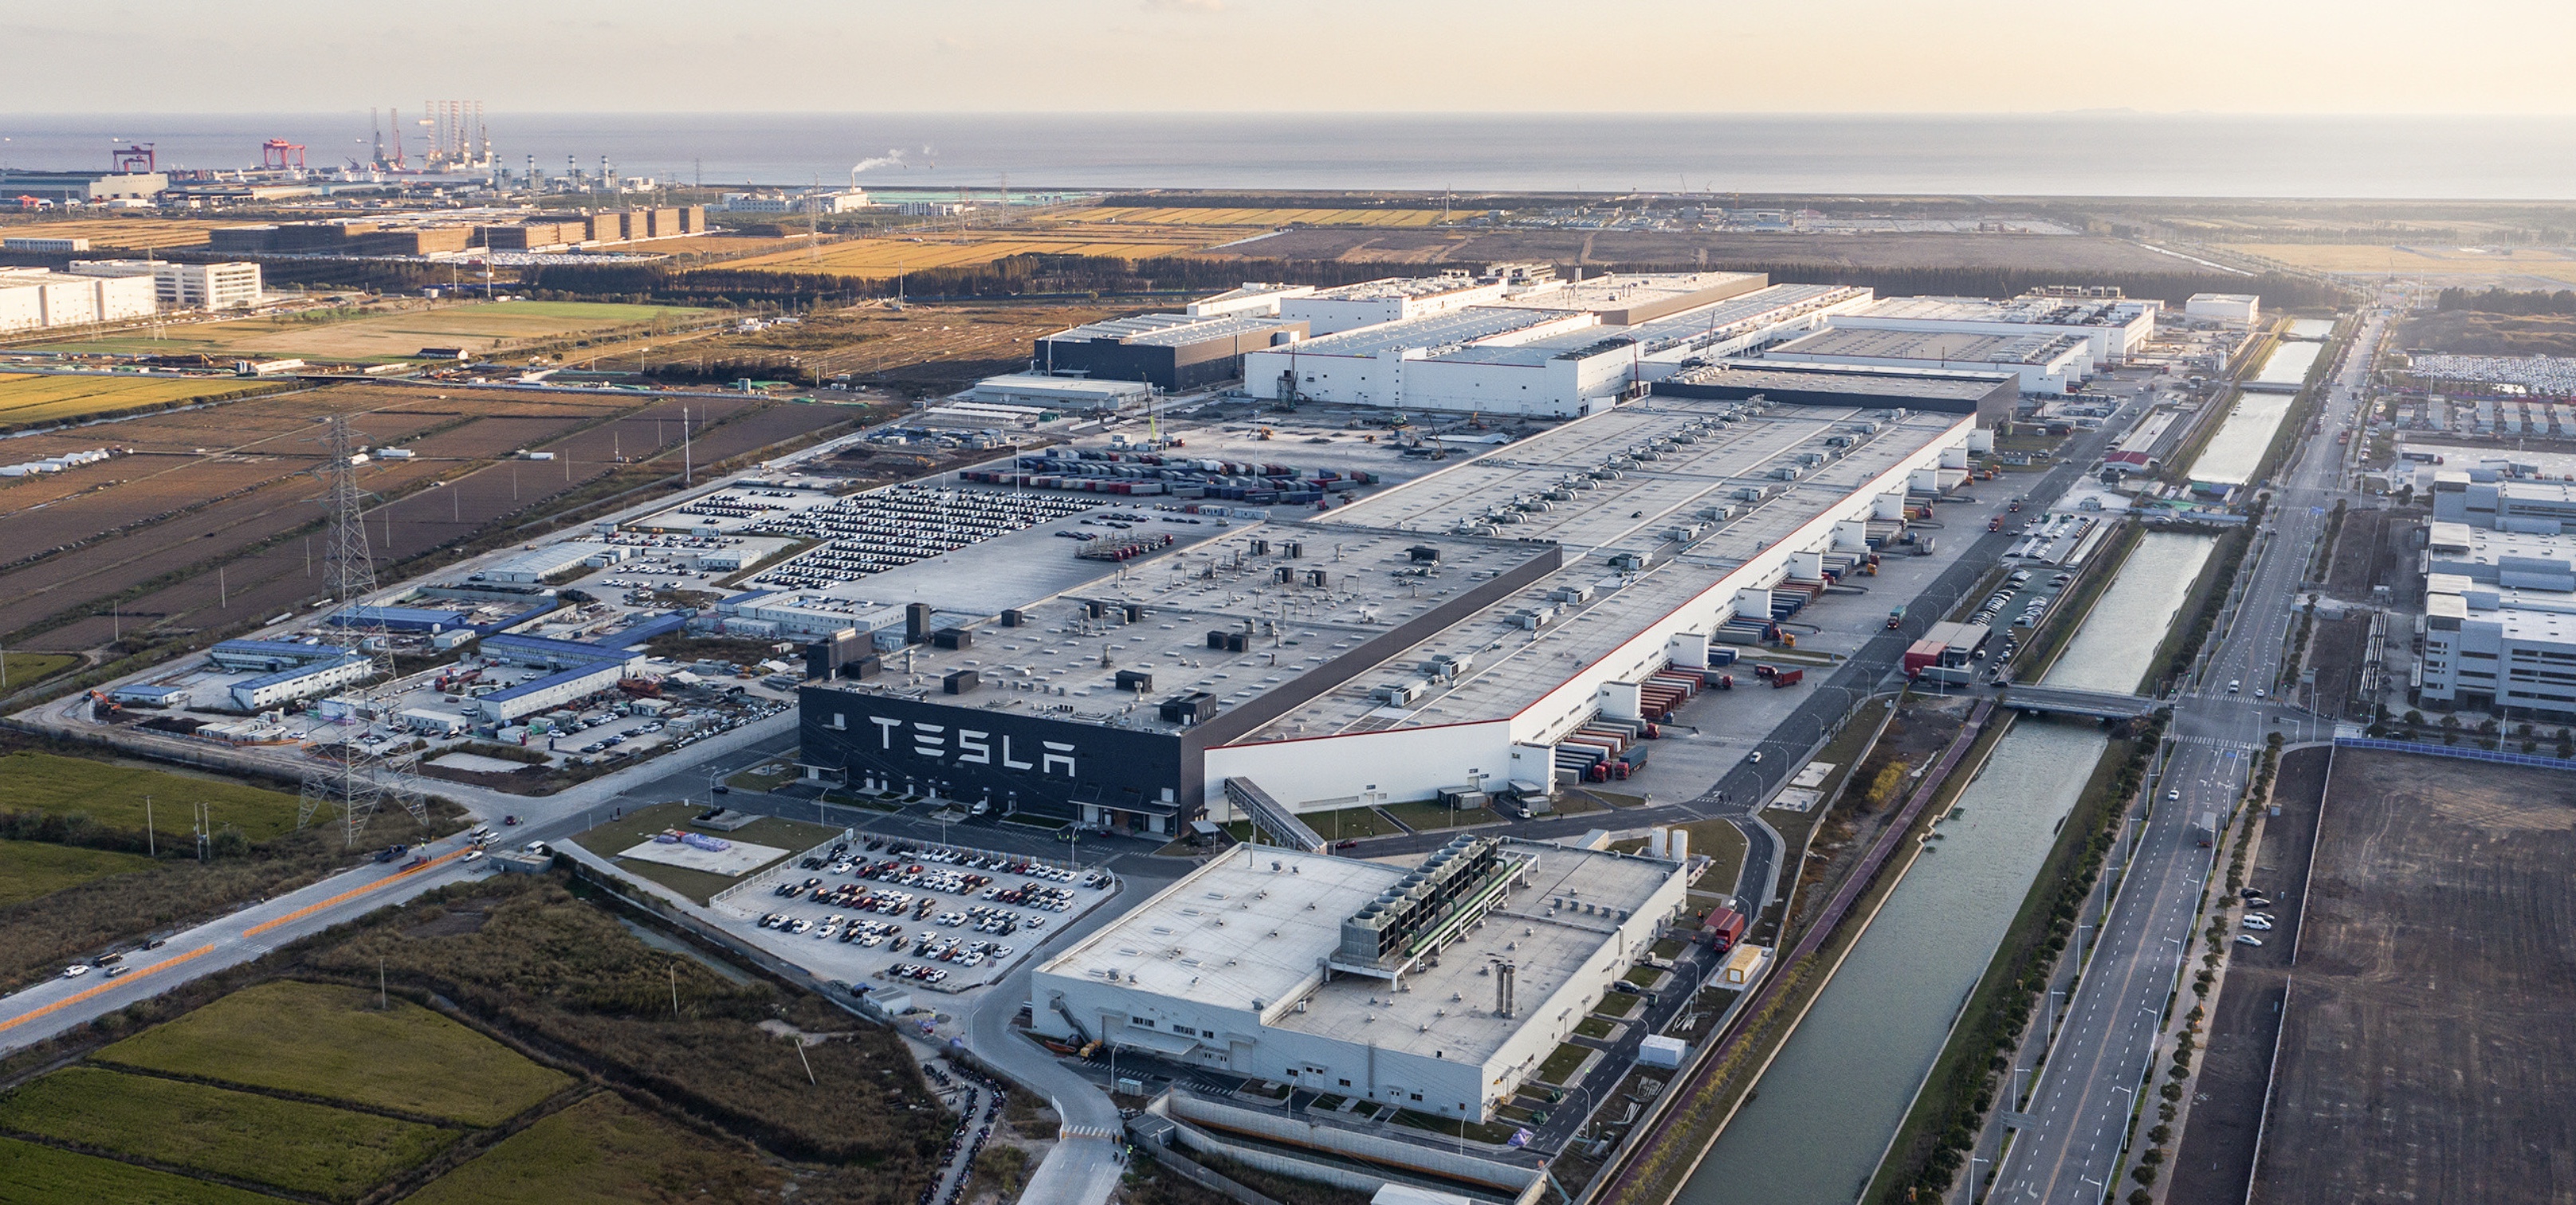 Tesla announces $3.6b Semi, 4680 battery factories in Nevada but questions abound